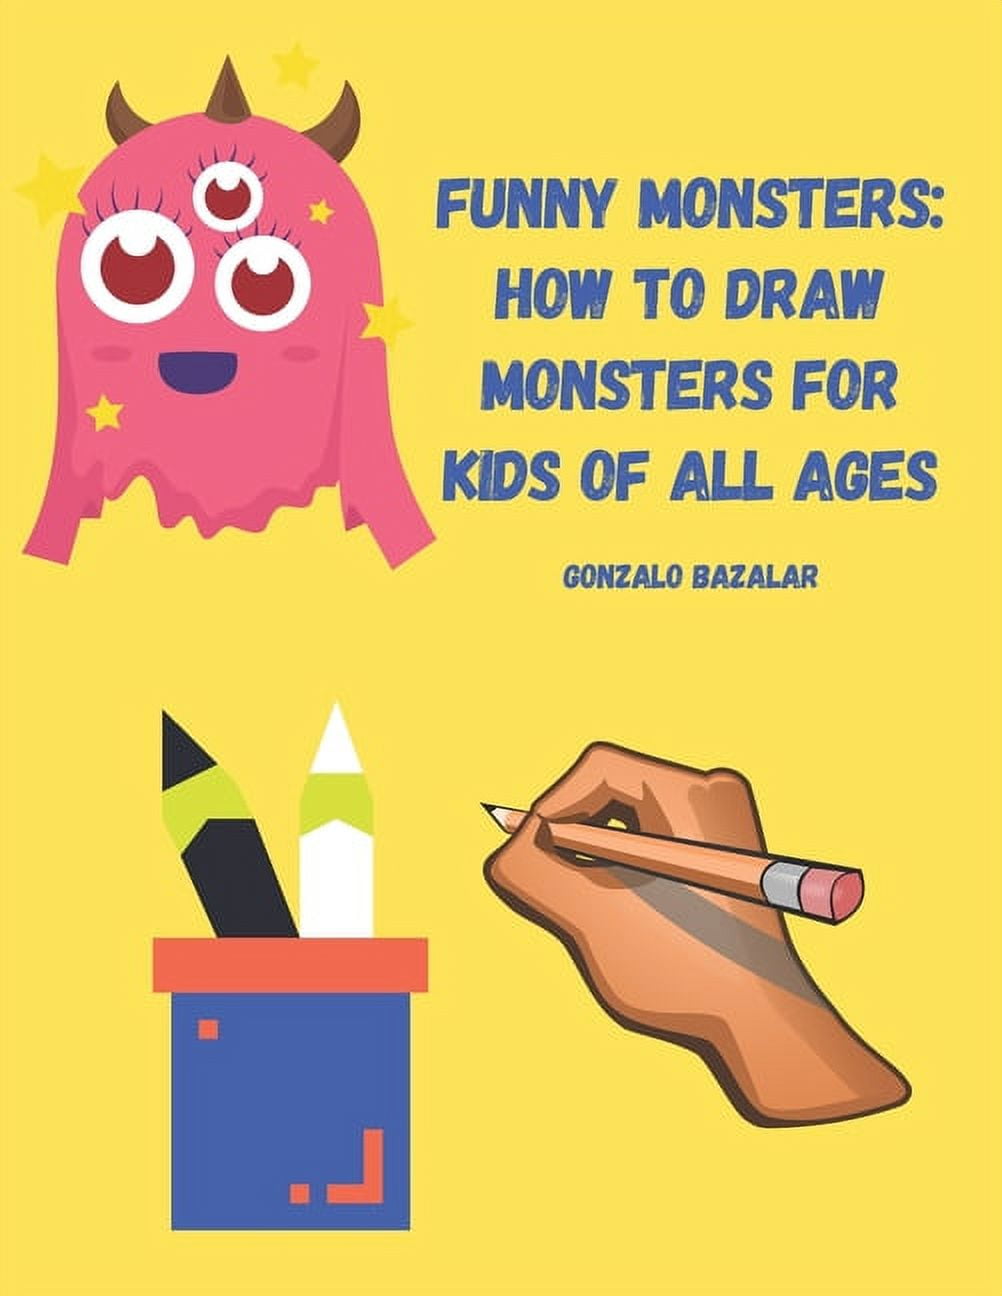 Silly Monsters Coloring Book: For Kids Ages 4-8 (Paperback)(Large Print) 